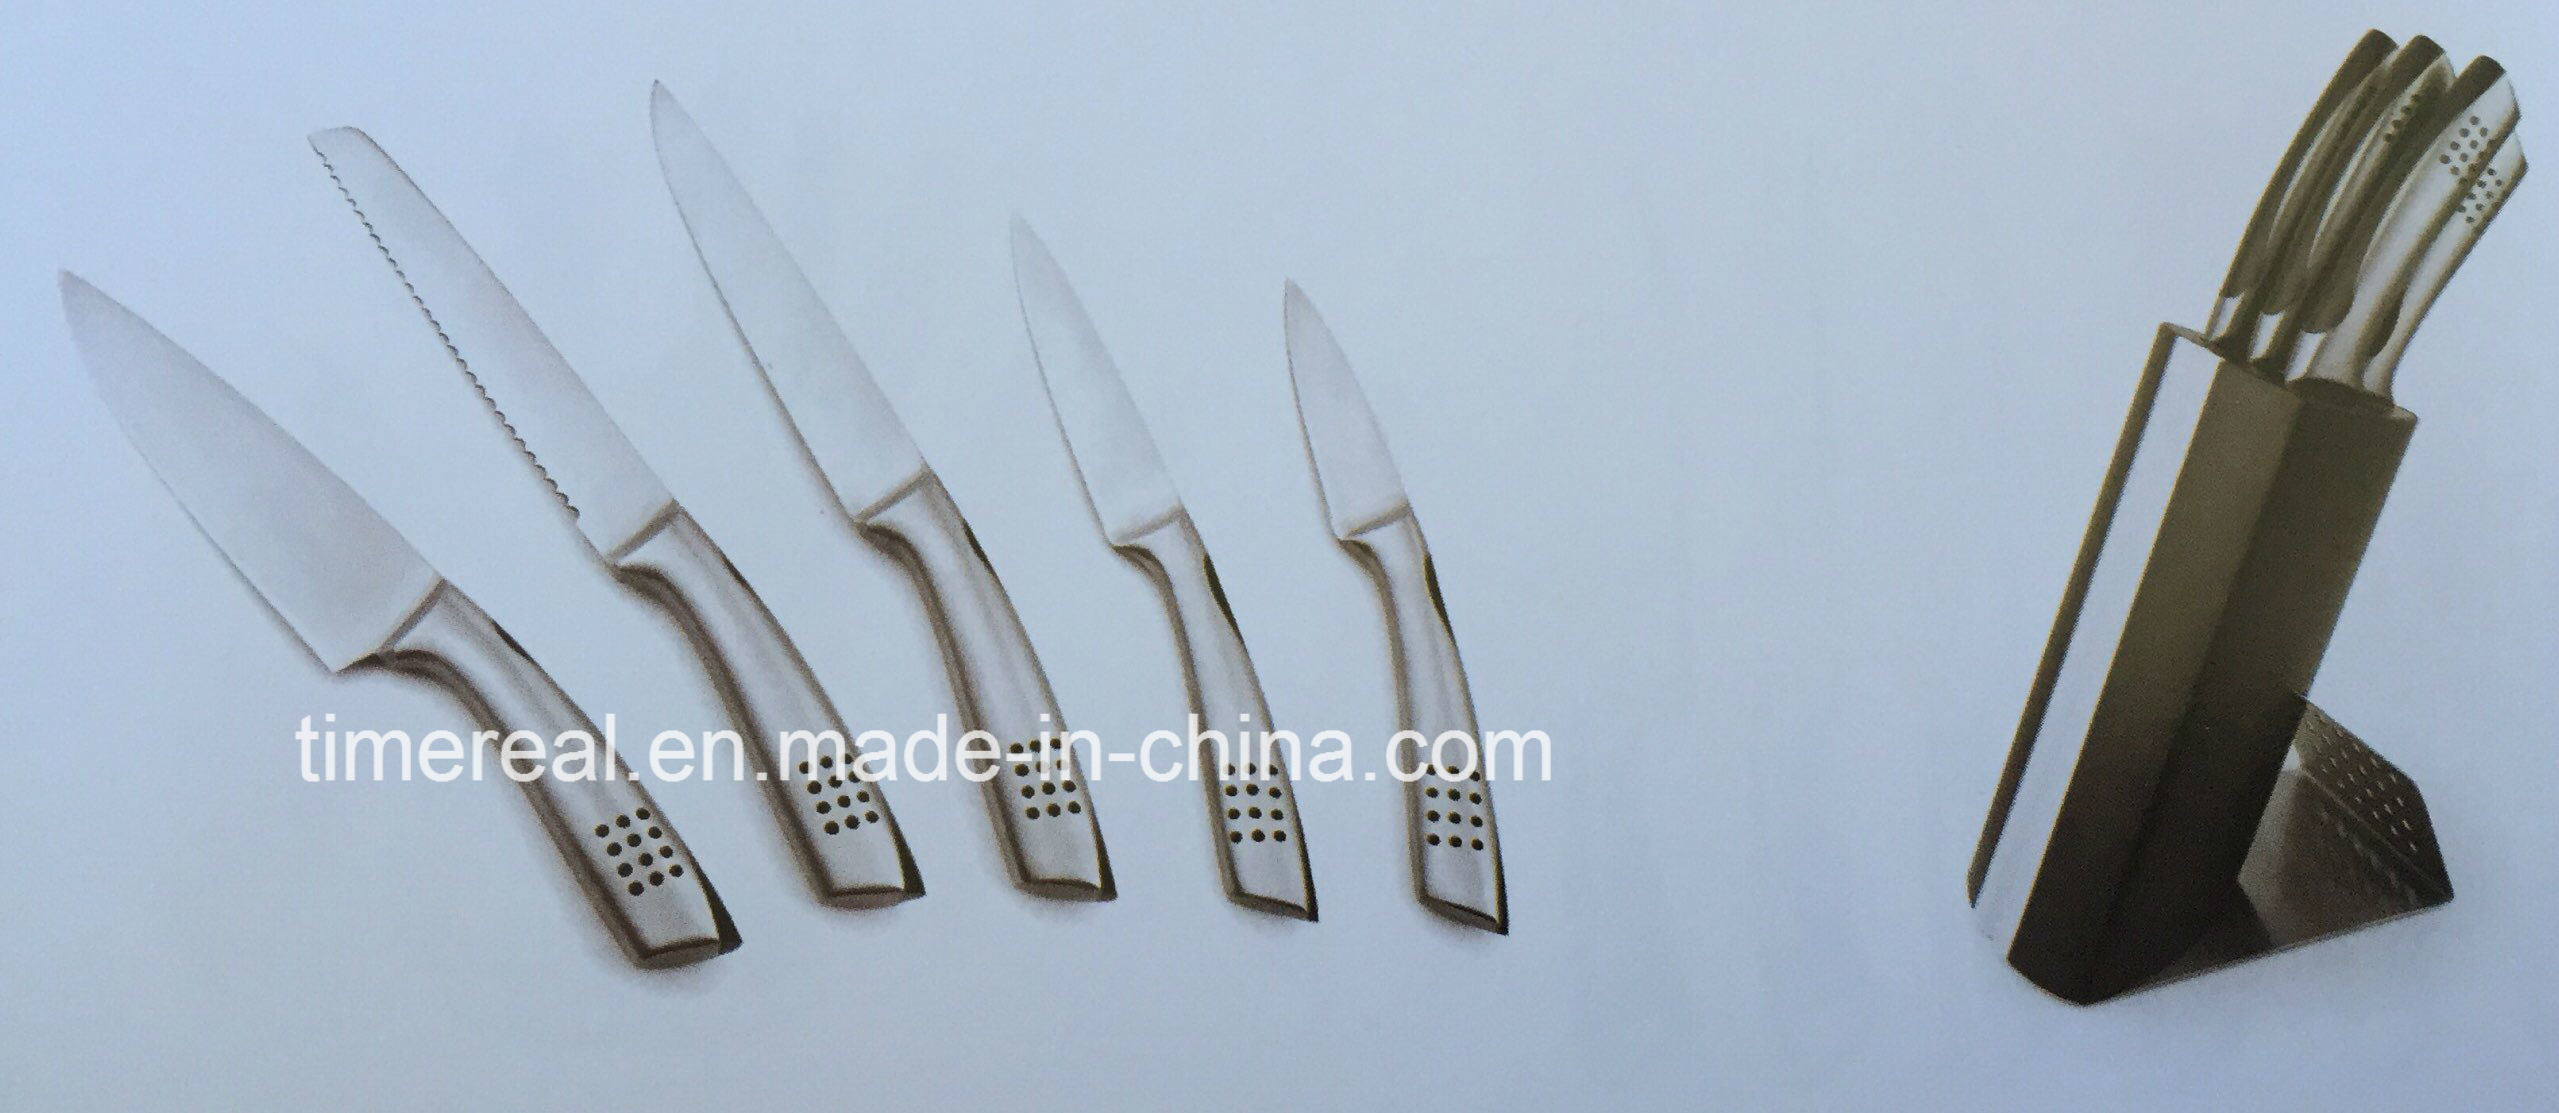 Stainless Steel Kitchen Knives Set with Painting No. Fj-0049